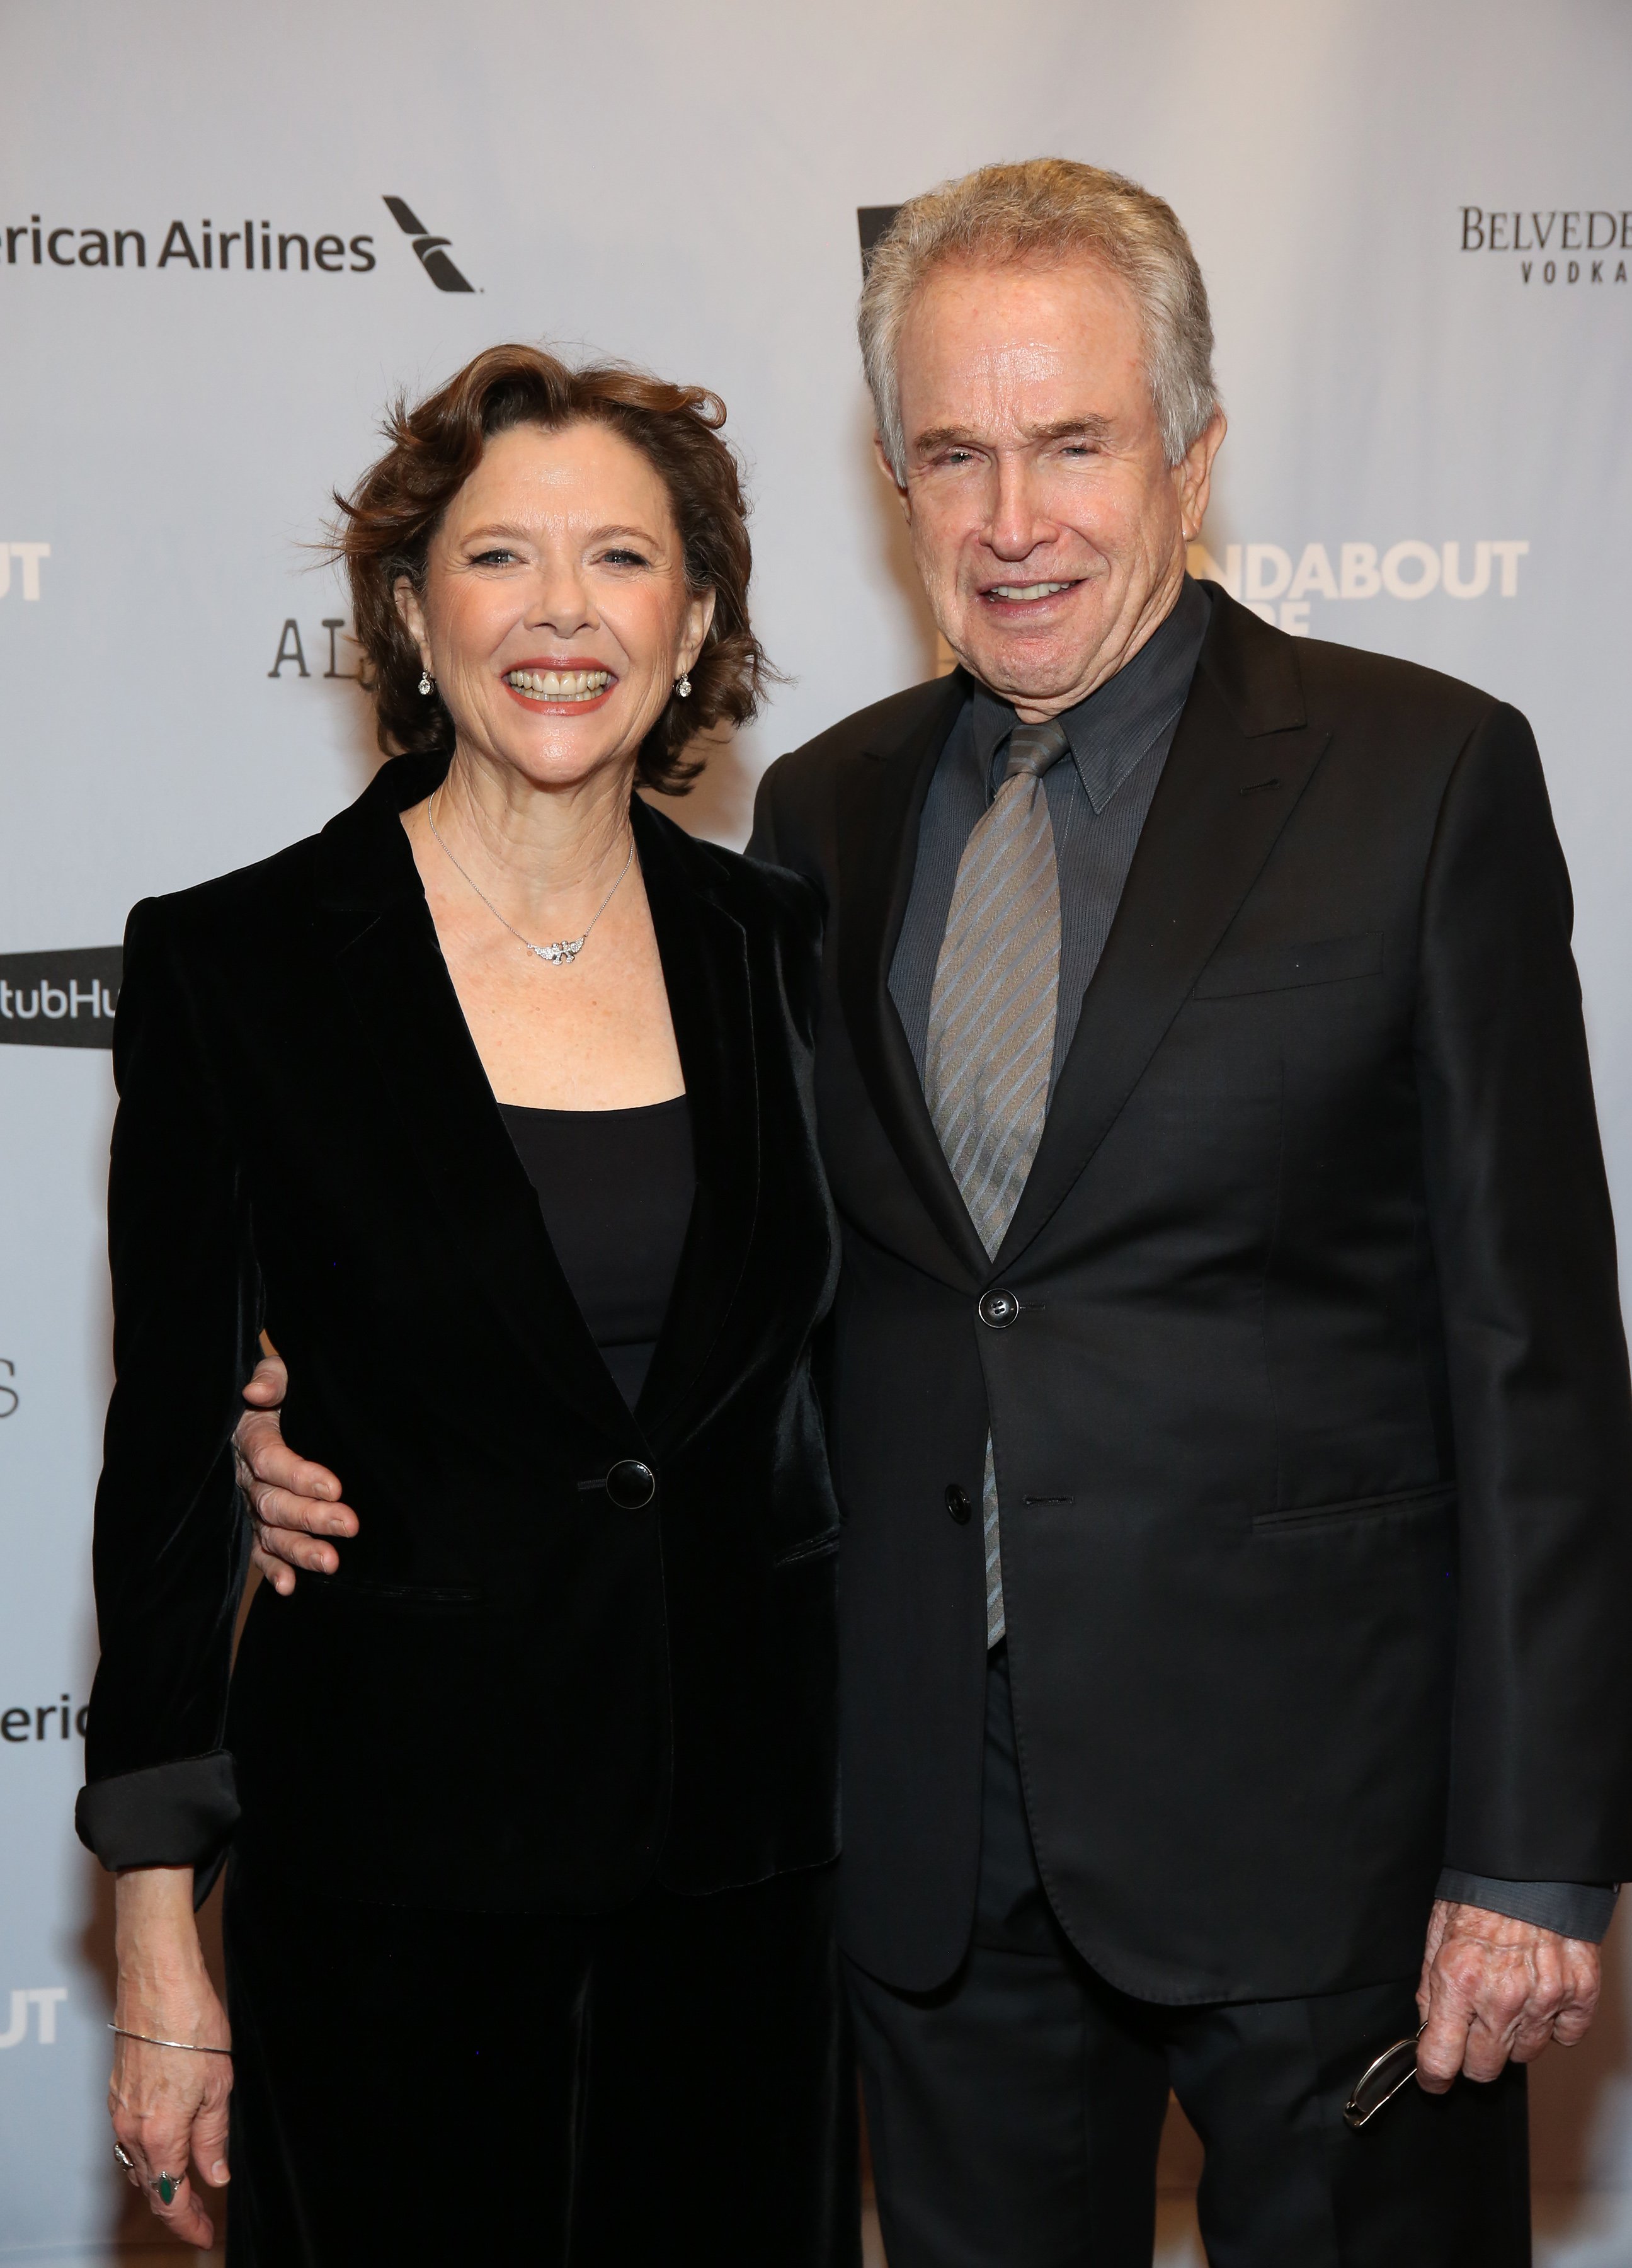 Annette Bening and Warren Beatty attend the Broadway Opening Night After Party for "All My Sons" at The American Airlines Theatre on April 22, 2019 in New York City | Source: Getty Images